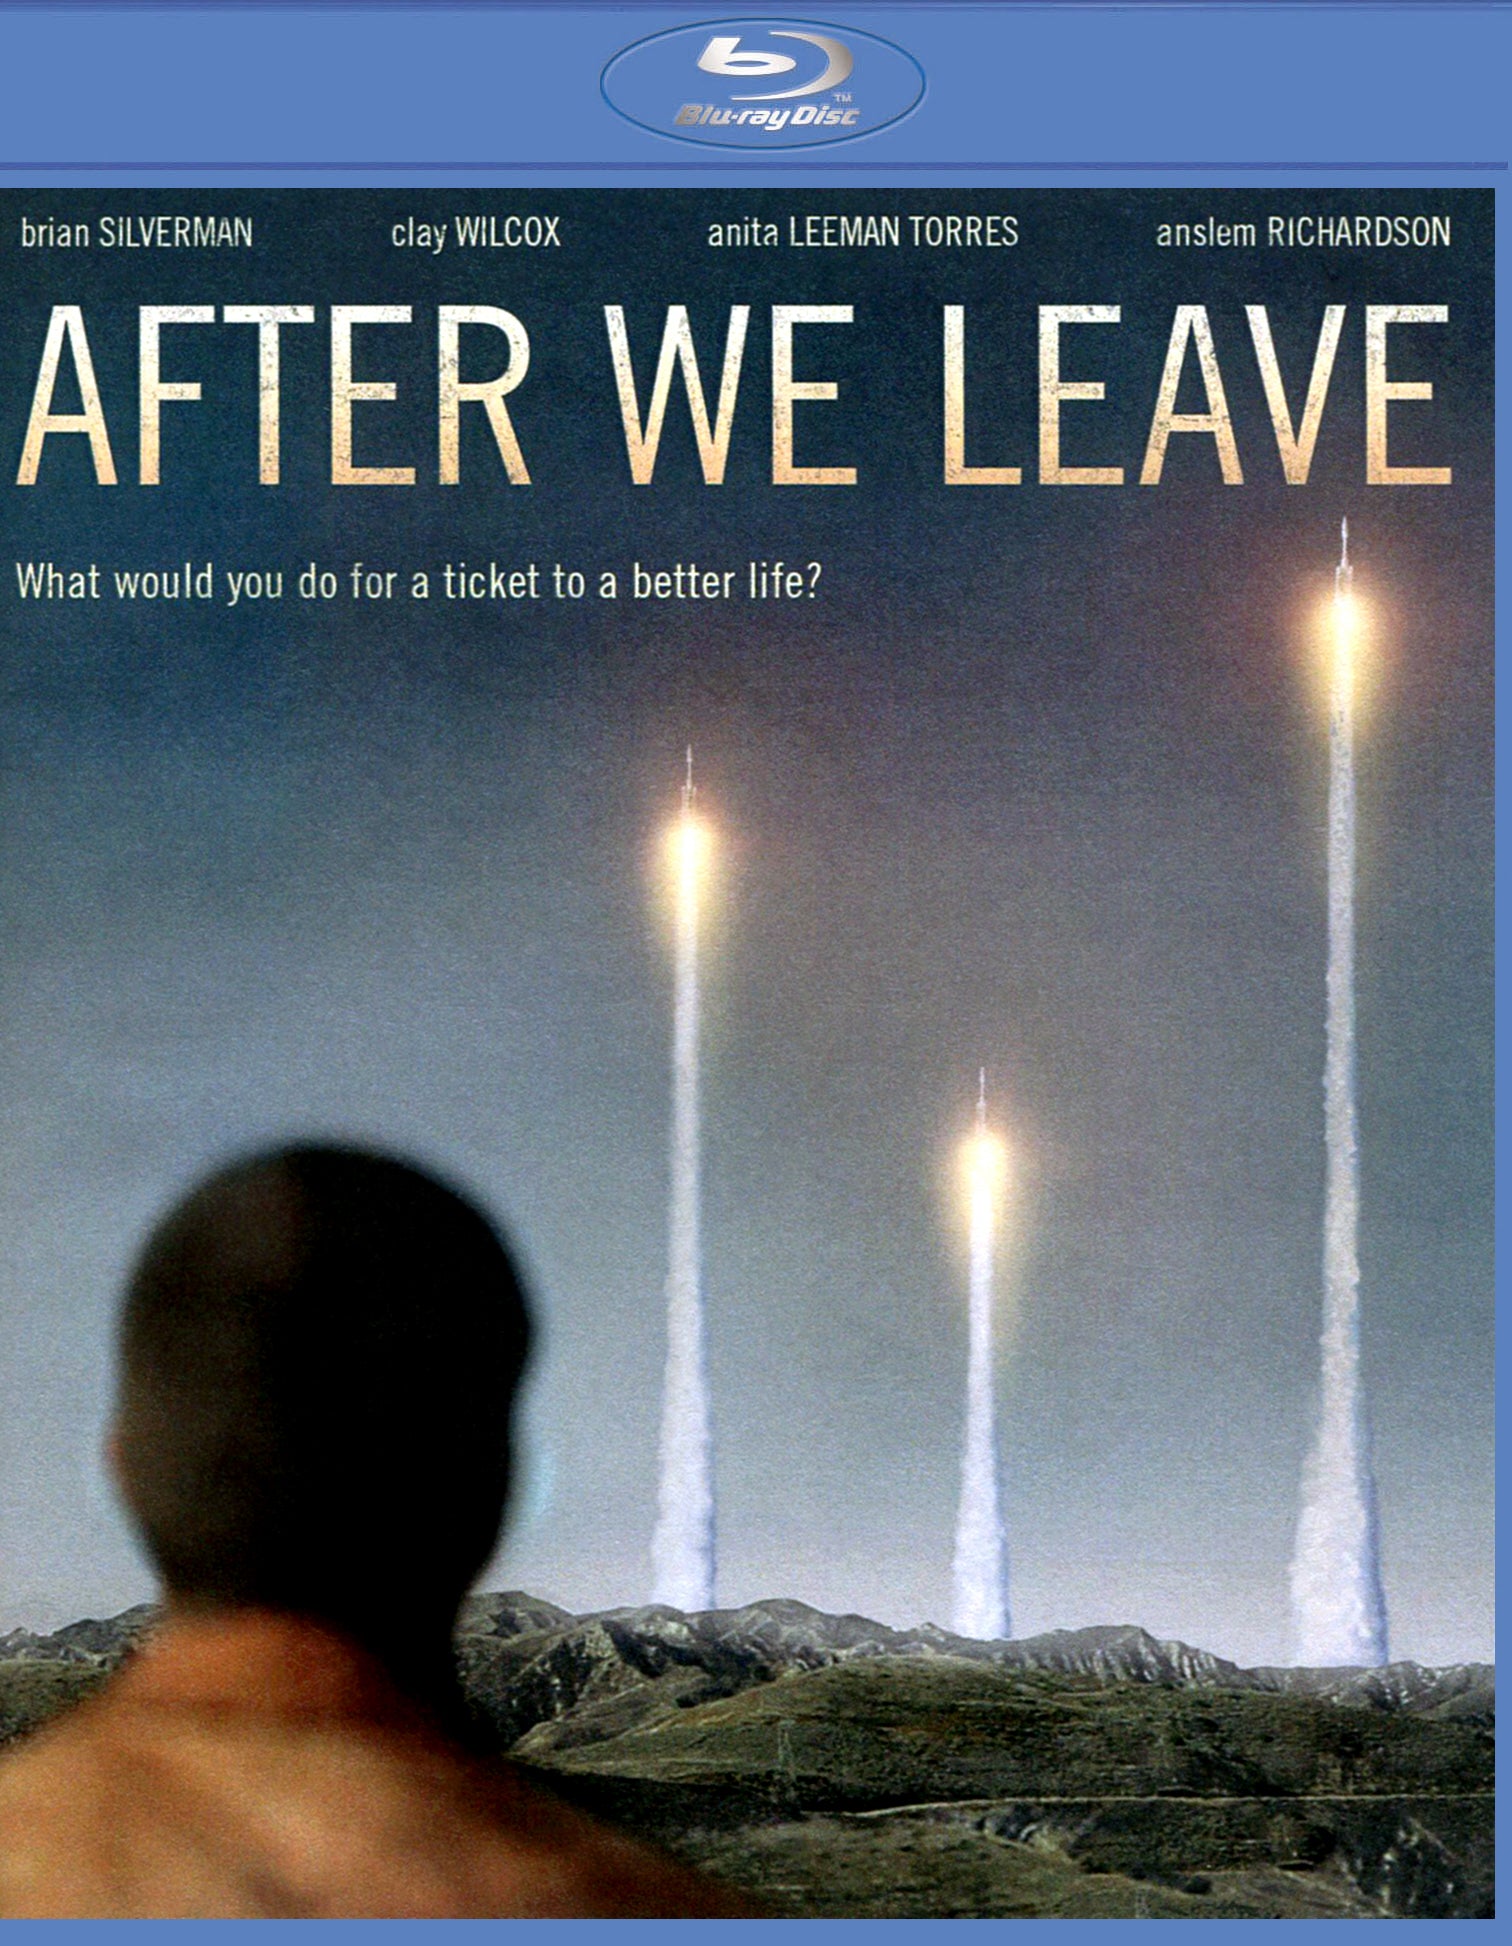 After We Leave [Blu-ray] cover art